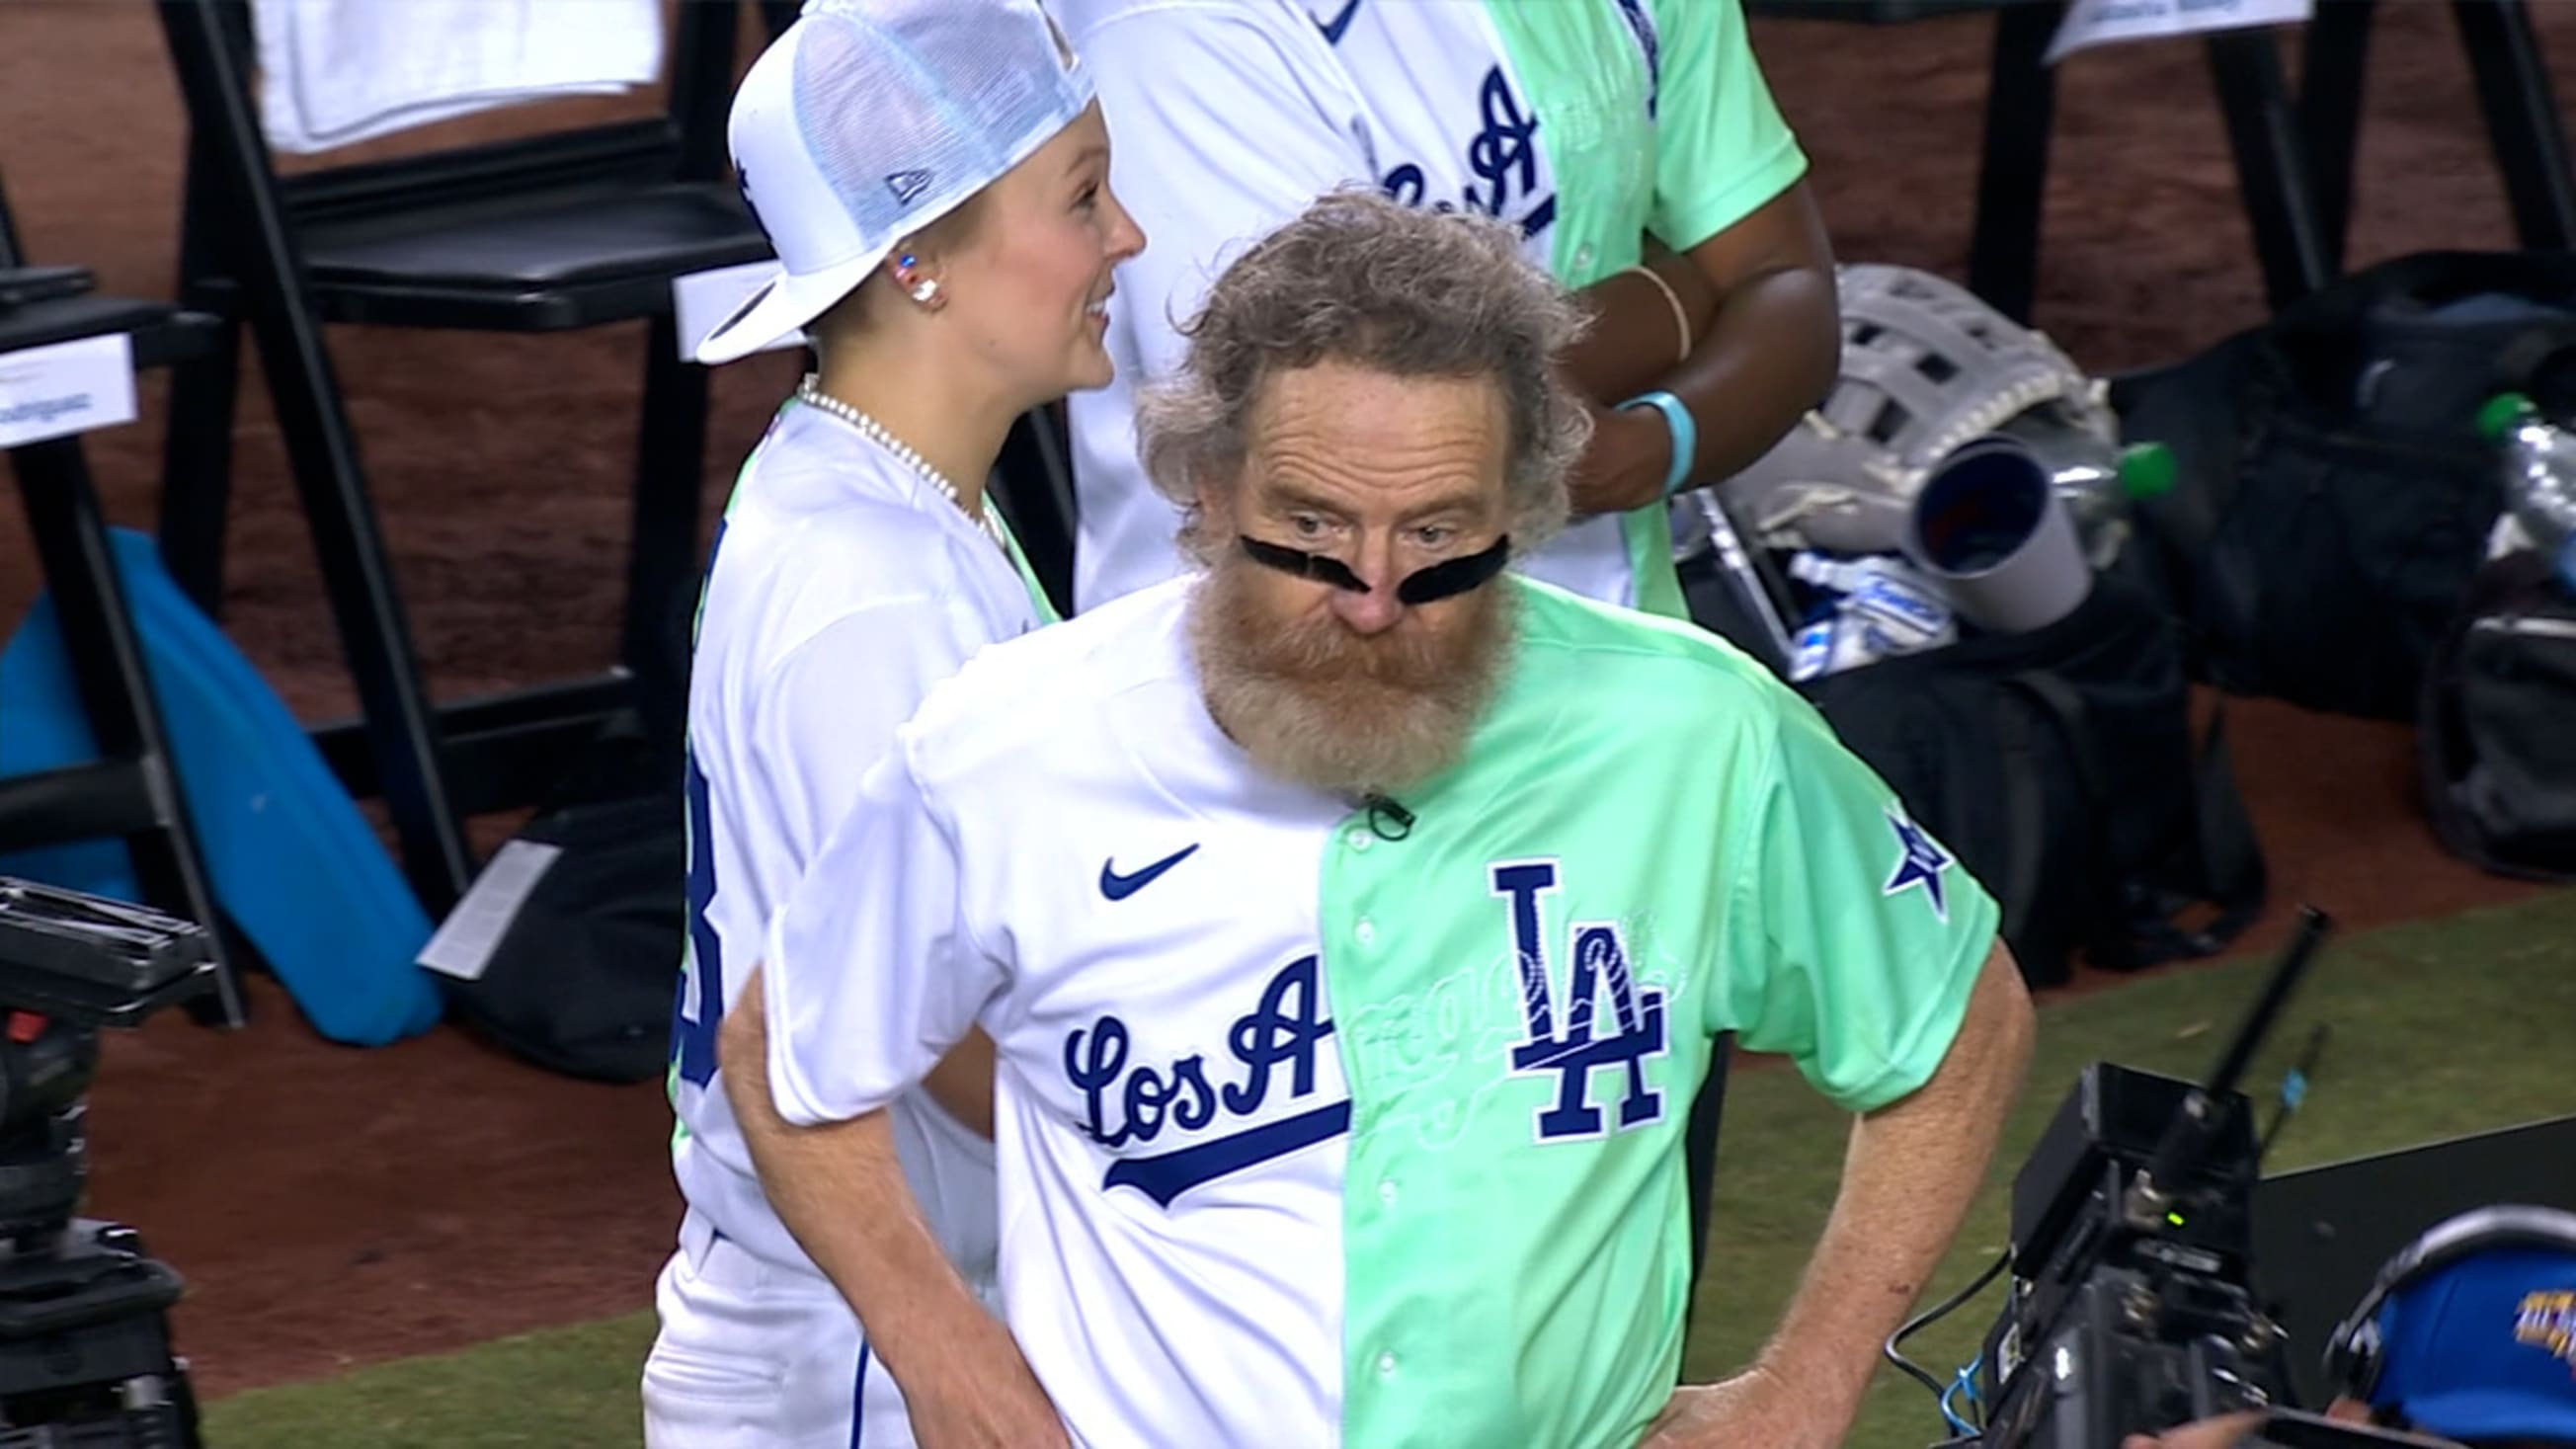 Bryan Cranston Hit By Ball, Ejected From All-Star Celebrity Softball Game